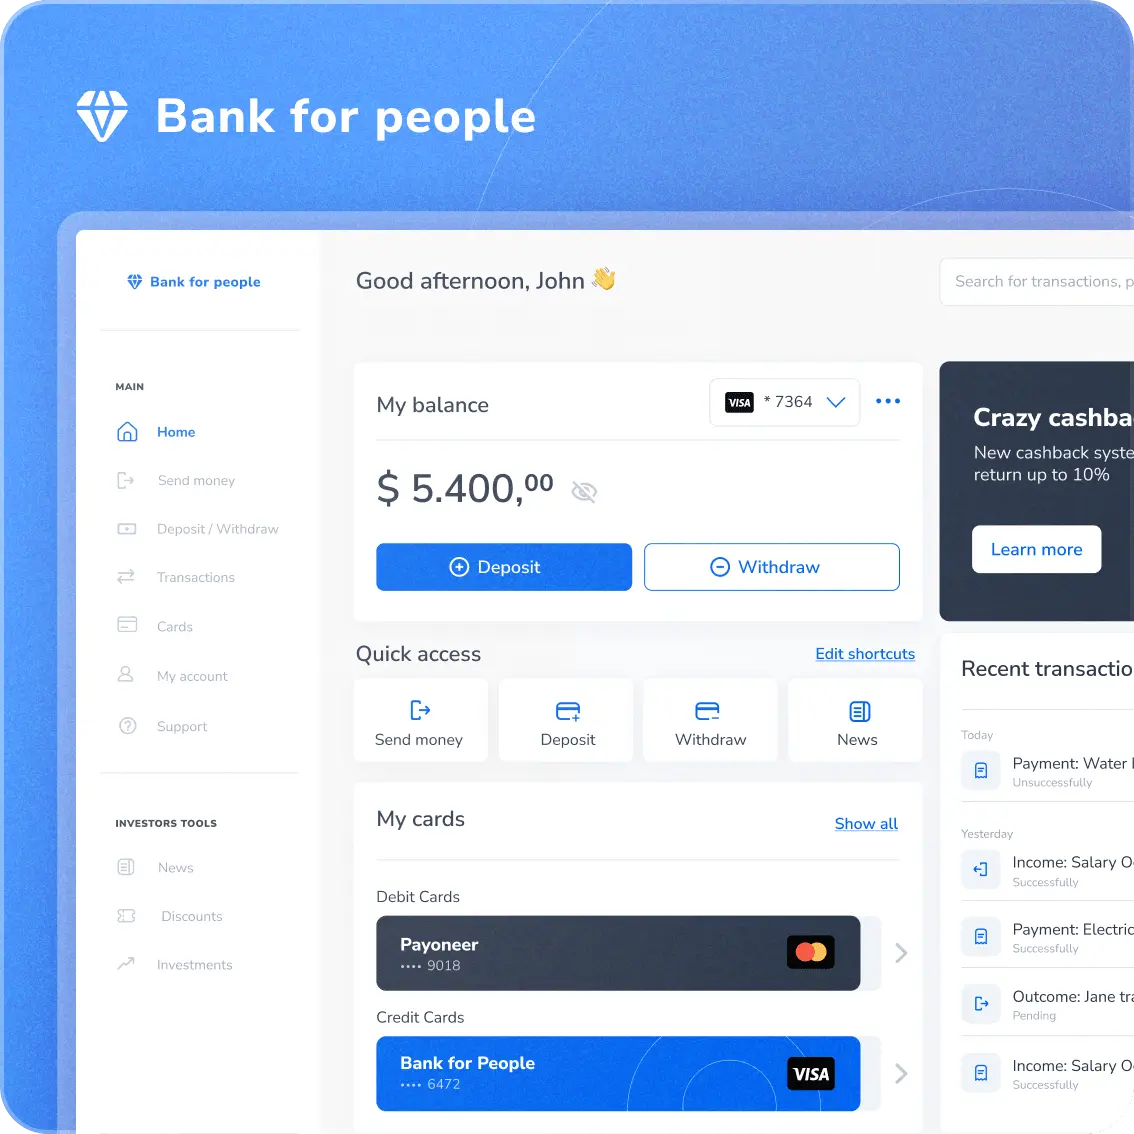 Bank for people